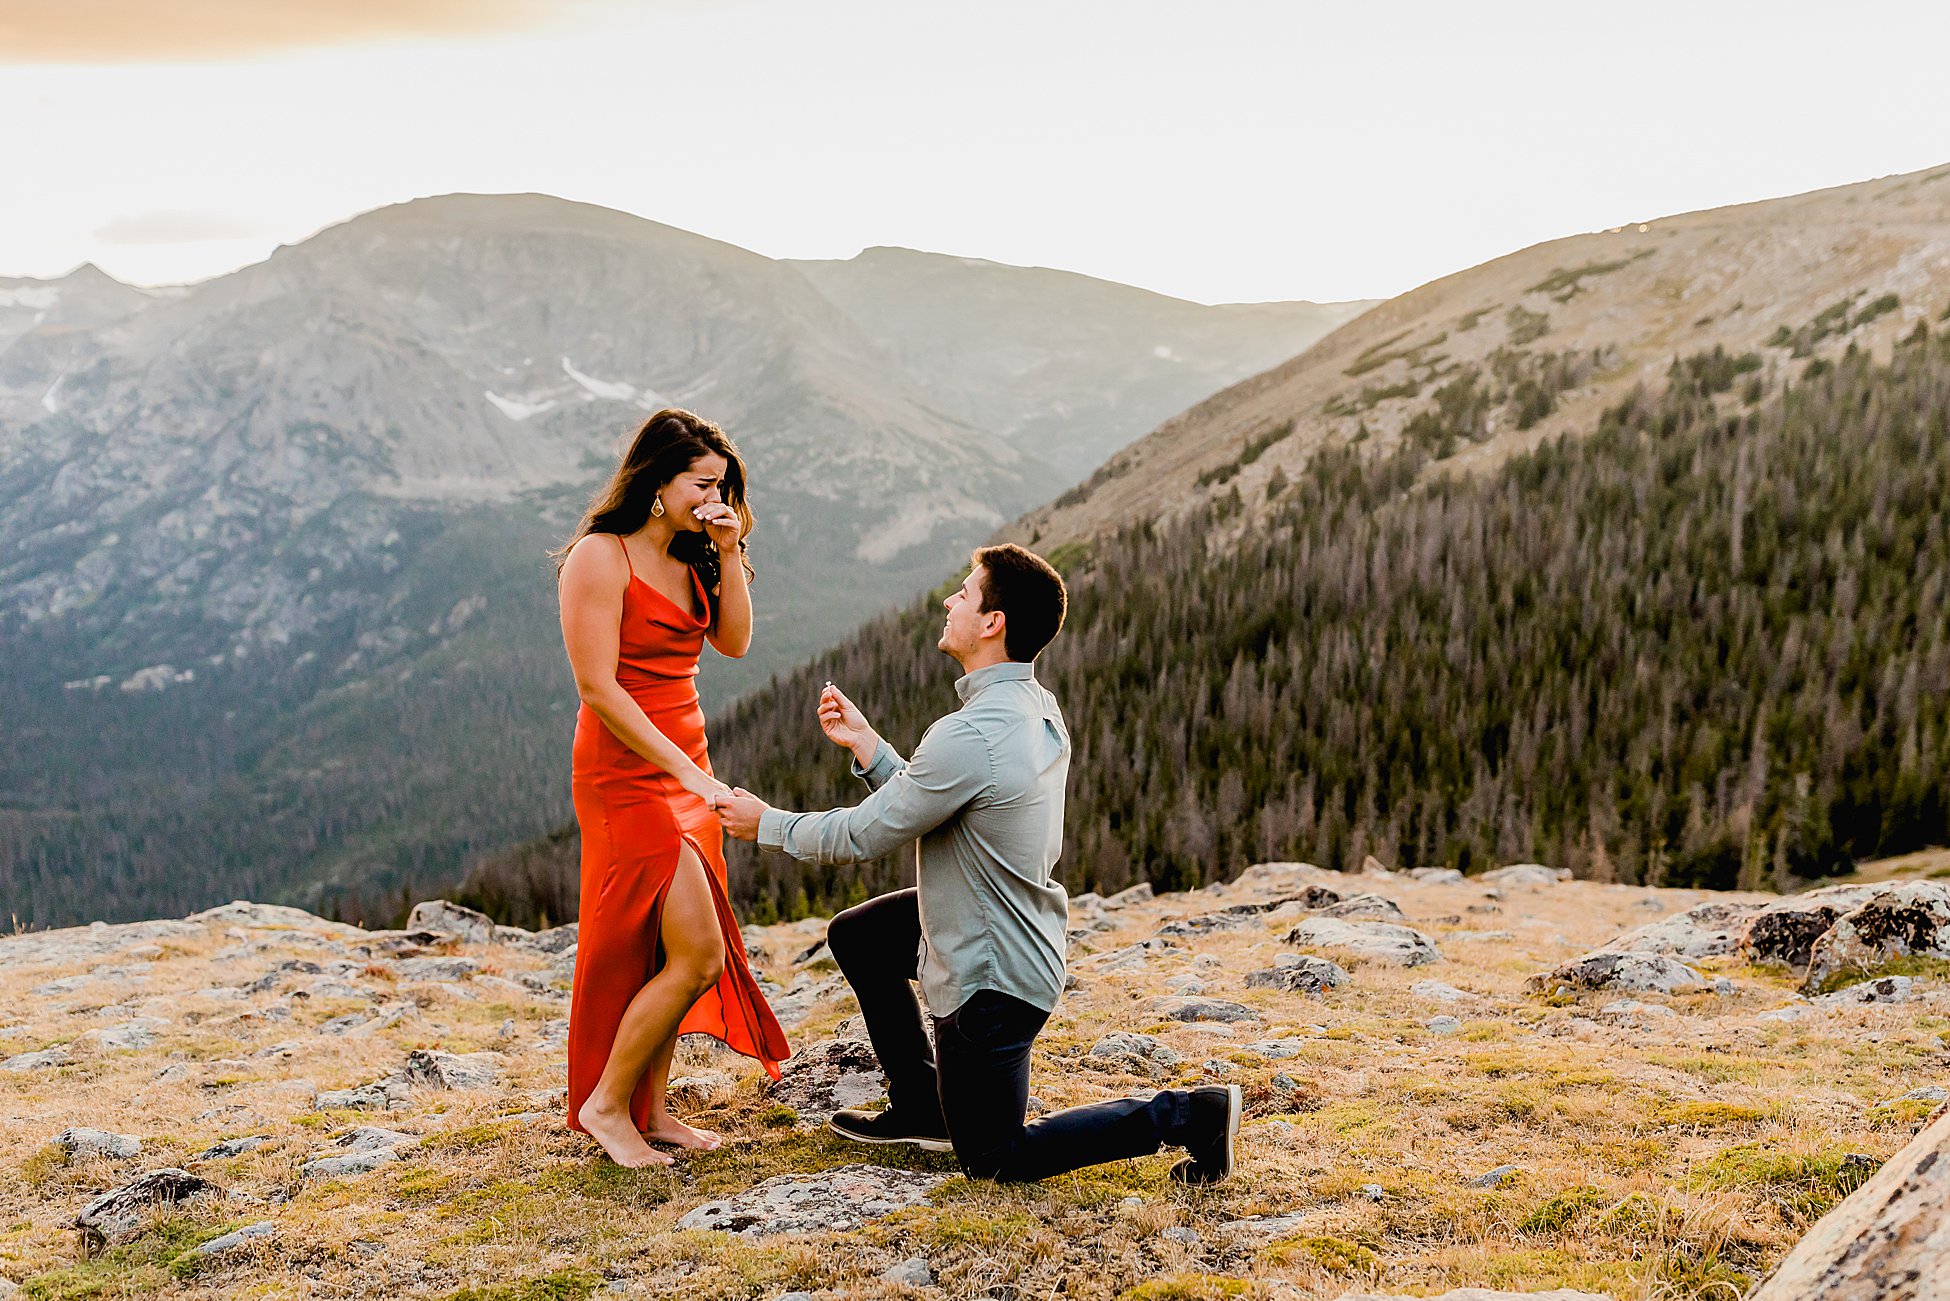 lauren casino photographs rocky mountain national park proposal with gorgeous mountain scenery at sunset